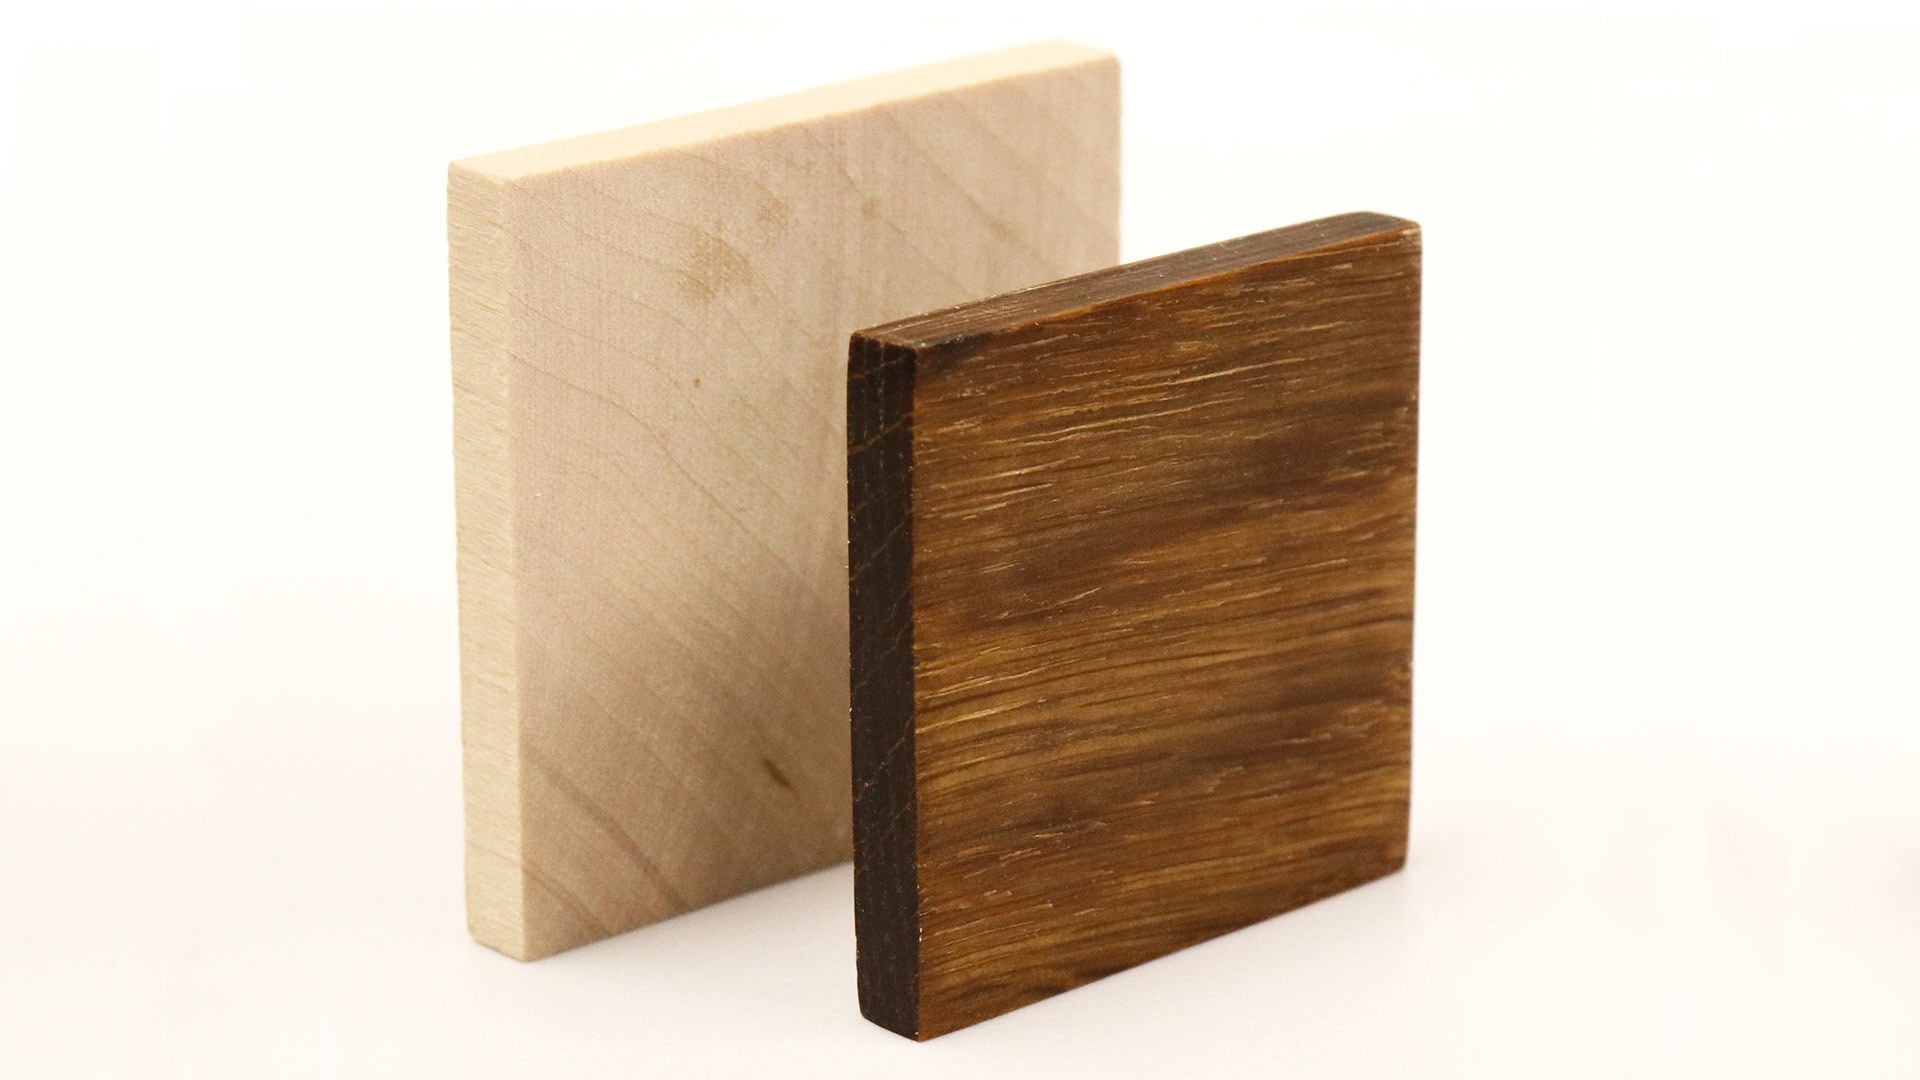 Many types of wood can be compressed to form MetalWood—a building material stronger and lighter than steel. The extreme compression process used causes wood to become much denser (below). Images courtesy of InventWood.